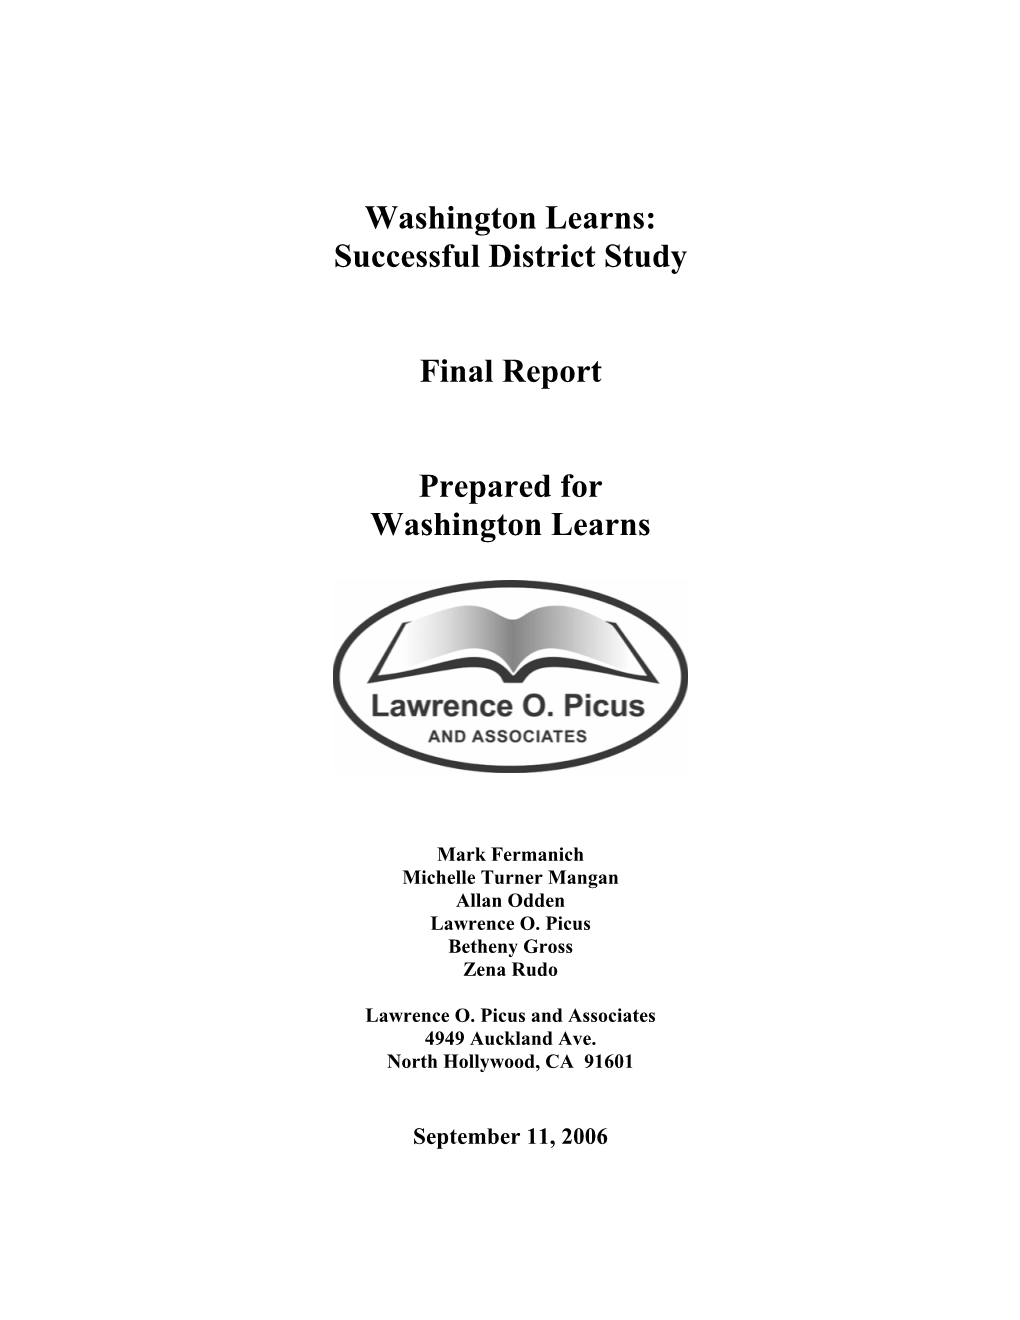 Successful District Study Final Report Prepared for Washington Learns